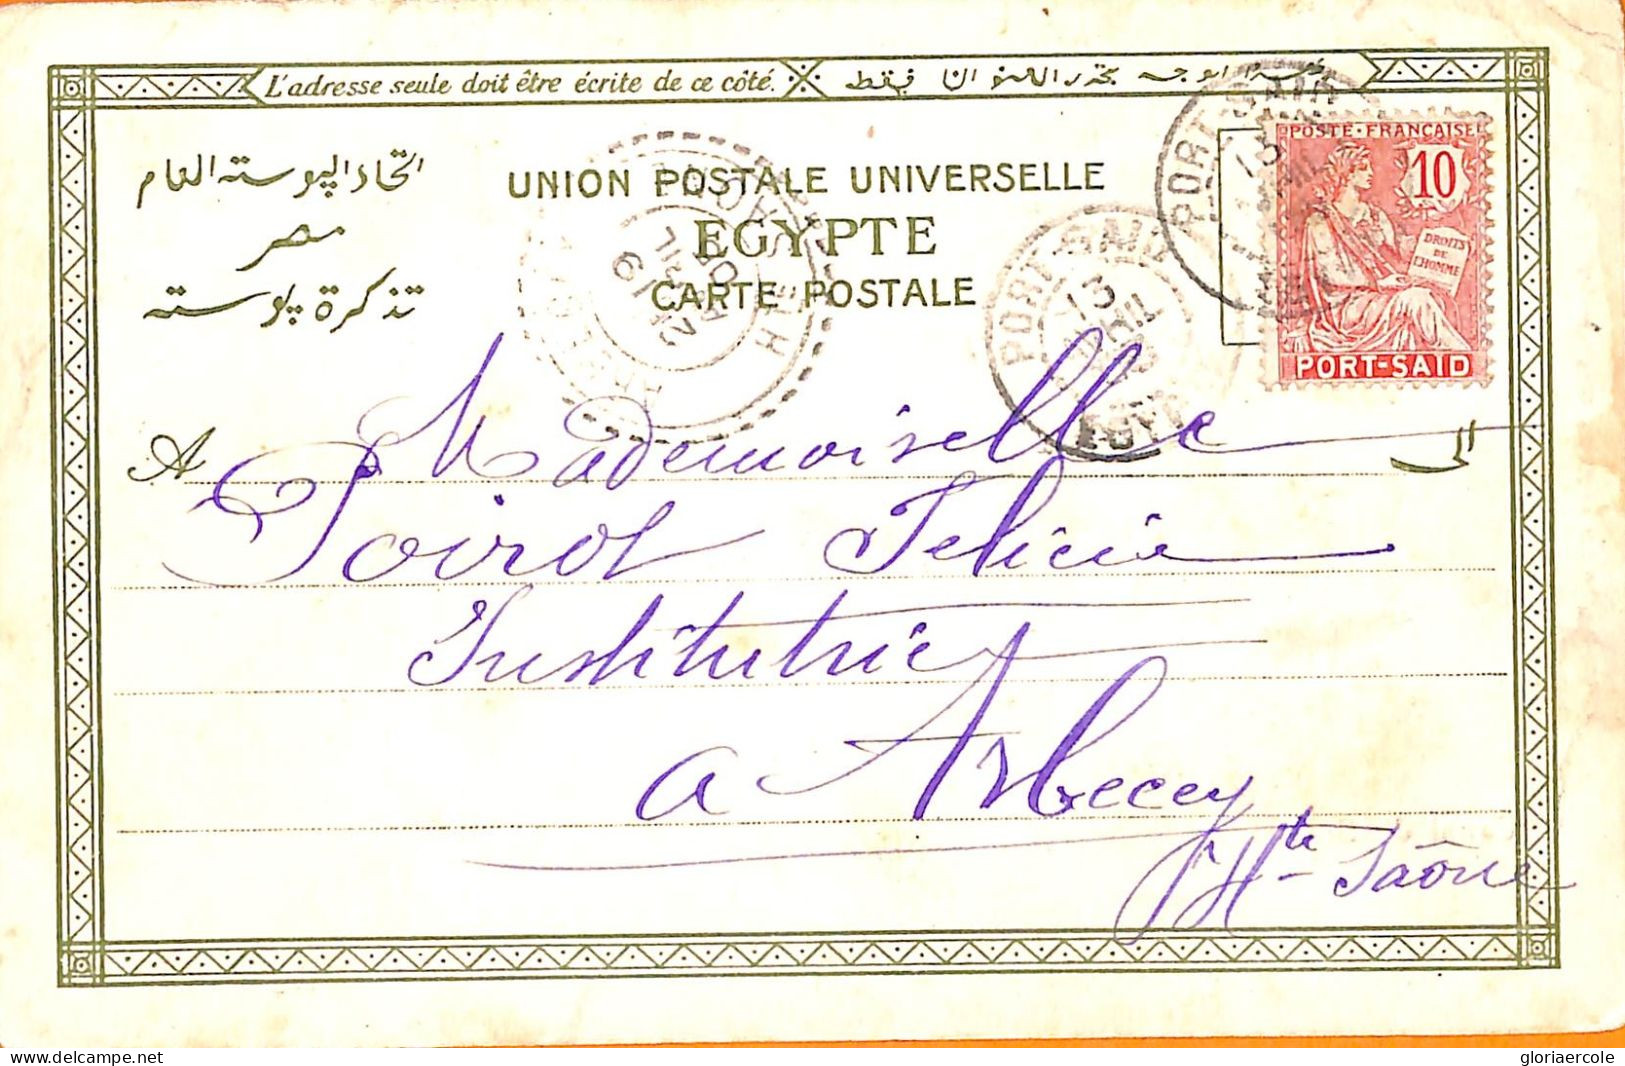 Aa0168 - FRENCH Port Said  EGYPT - POSTAL HISTORY - POSTCARD To FRANCE  1905 - Covers & Documents